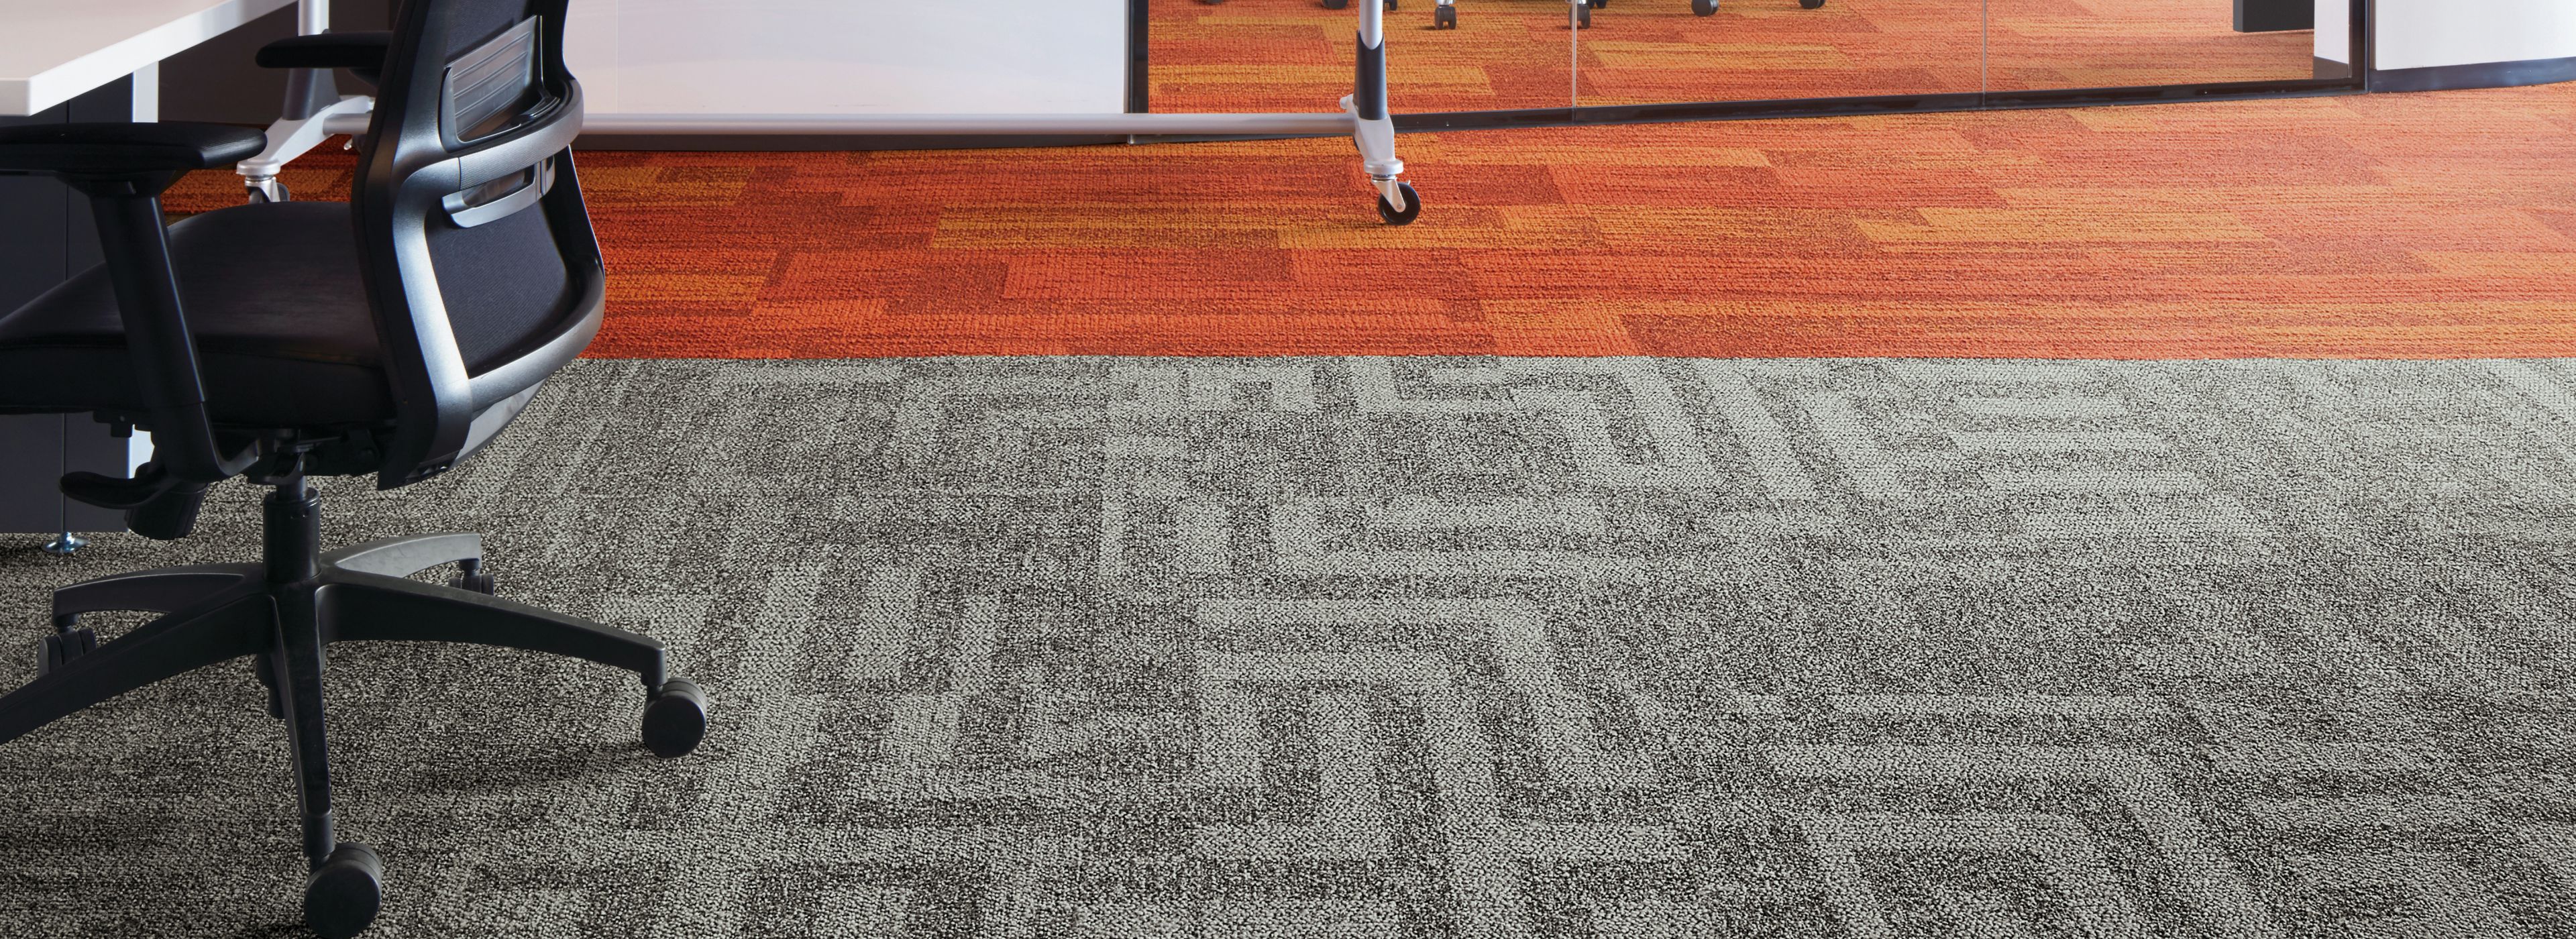 Interface Open Air 414 carpet tile with AE317 plank carpet tile in corner workstation with whiteboard and meeting room in background numéro d’image 1